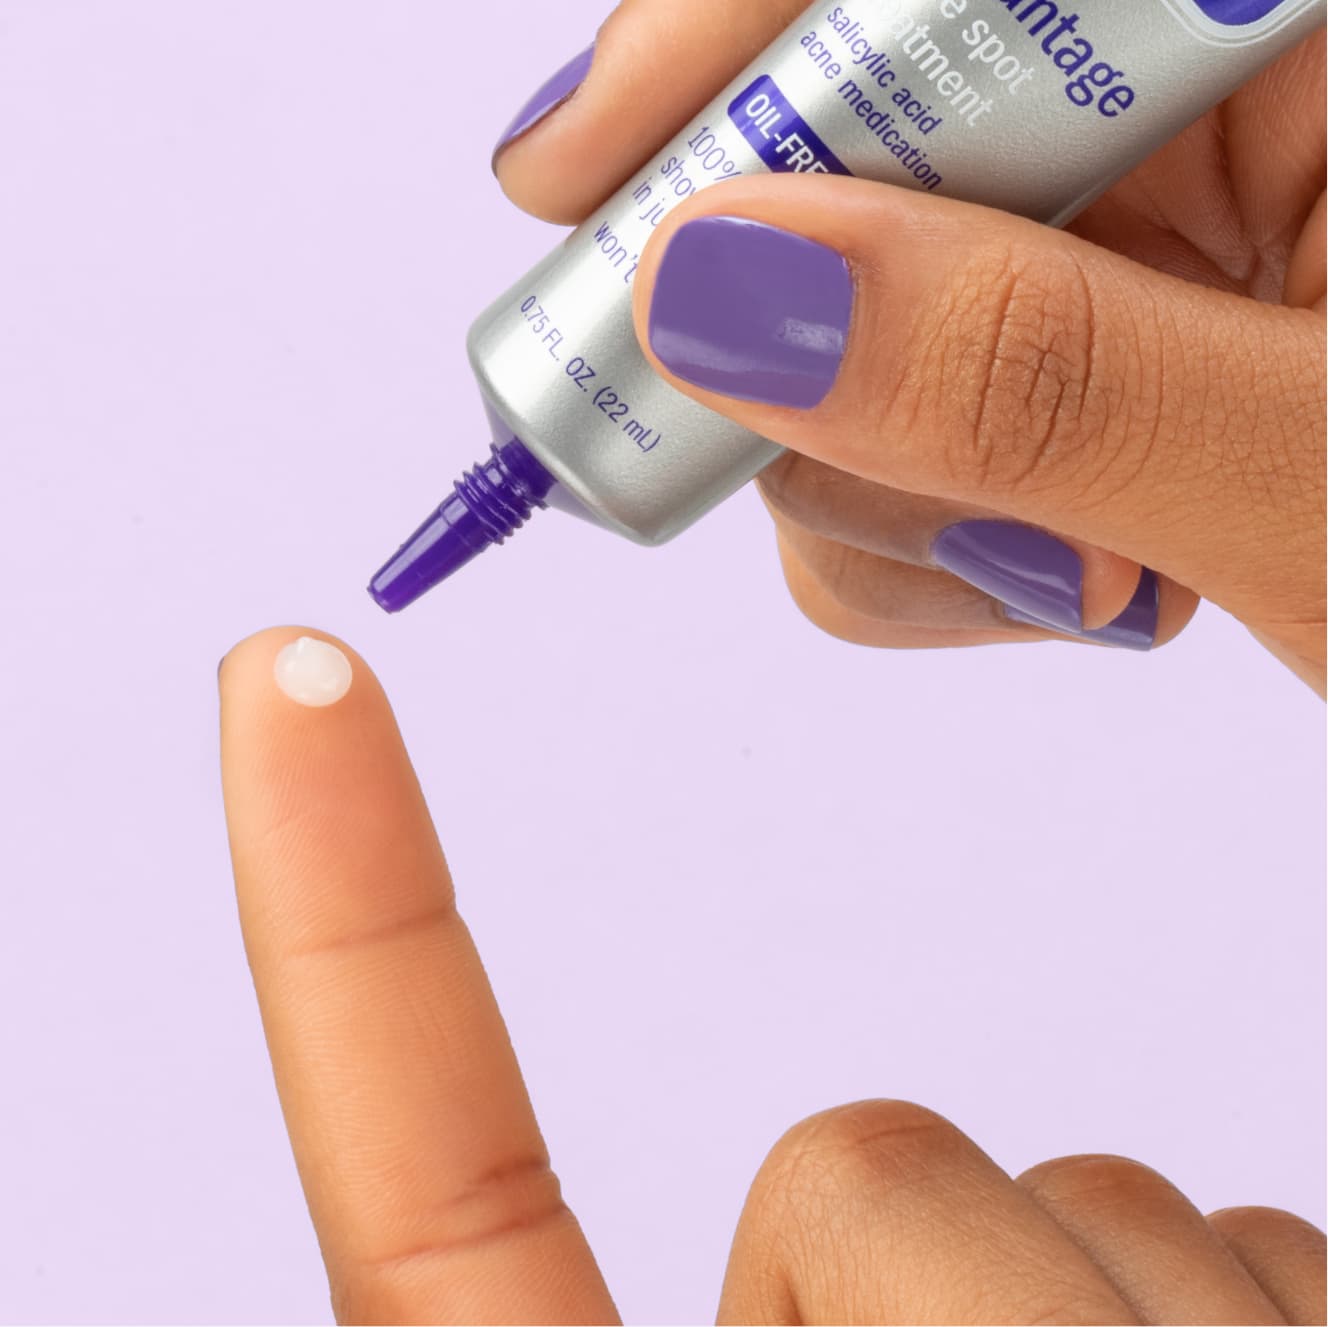 White Advantage spot treatment being applied by hand with purple nails on index finger 